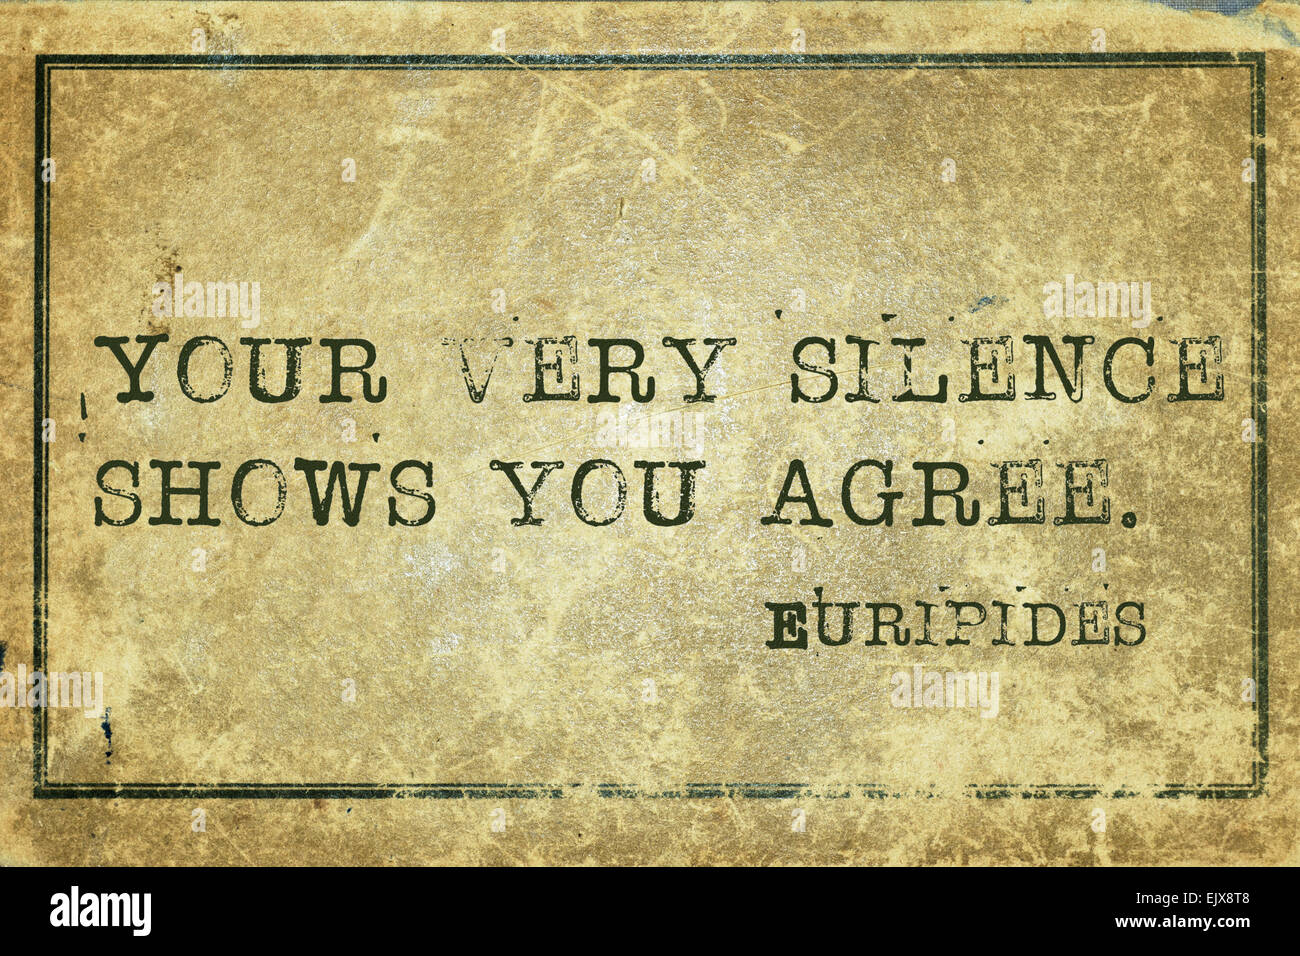 Your very silence shows you agree - ancient Greek philosopher Euripides quote printed on grunge vintage cardboard Stock Photo